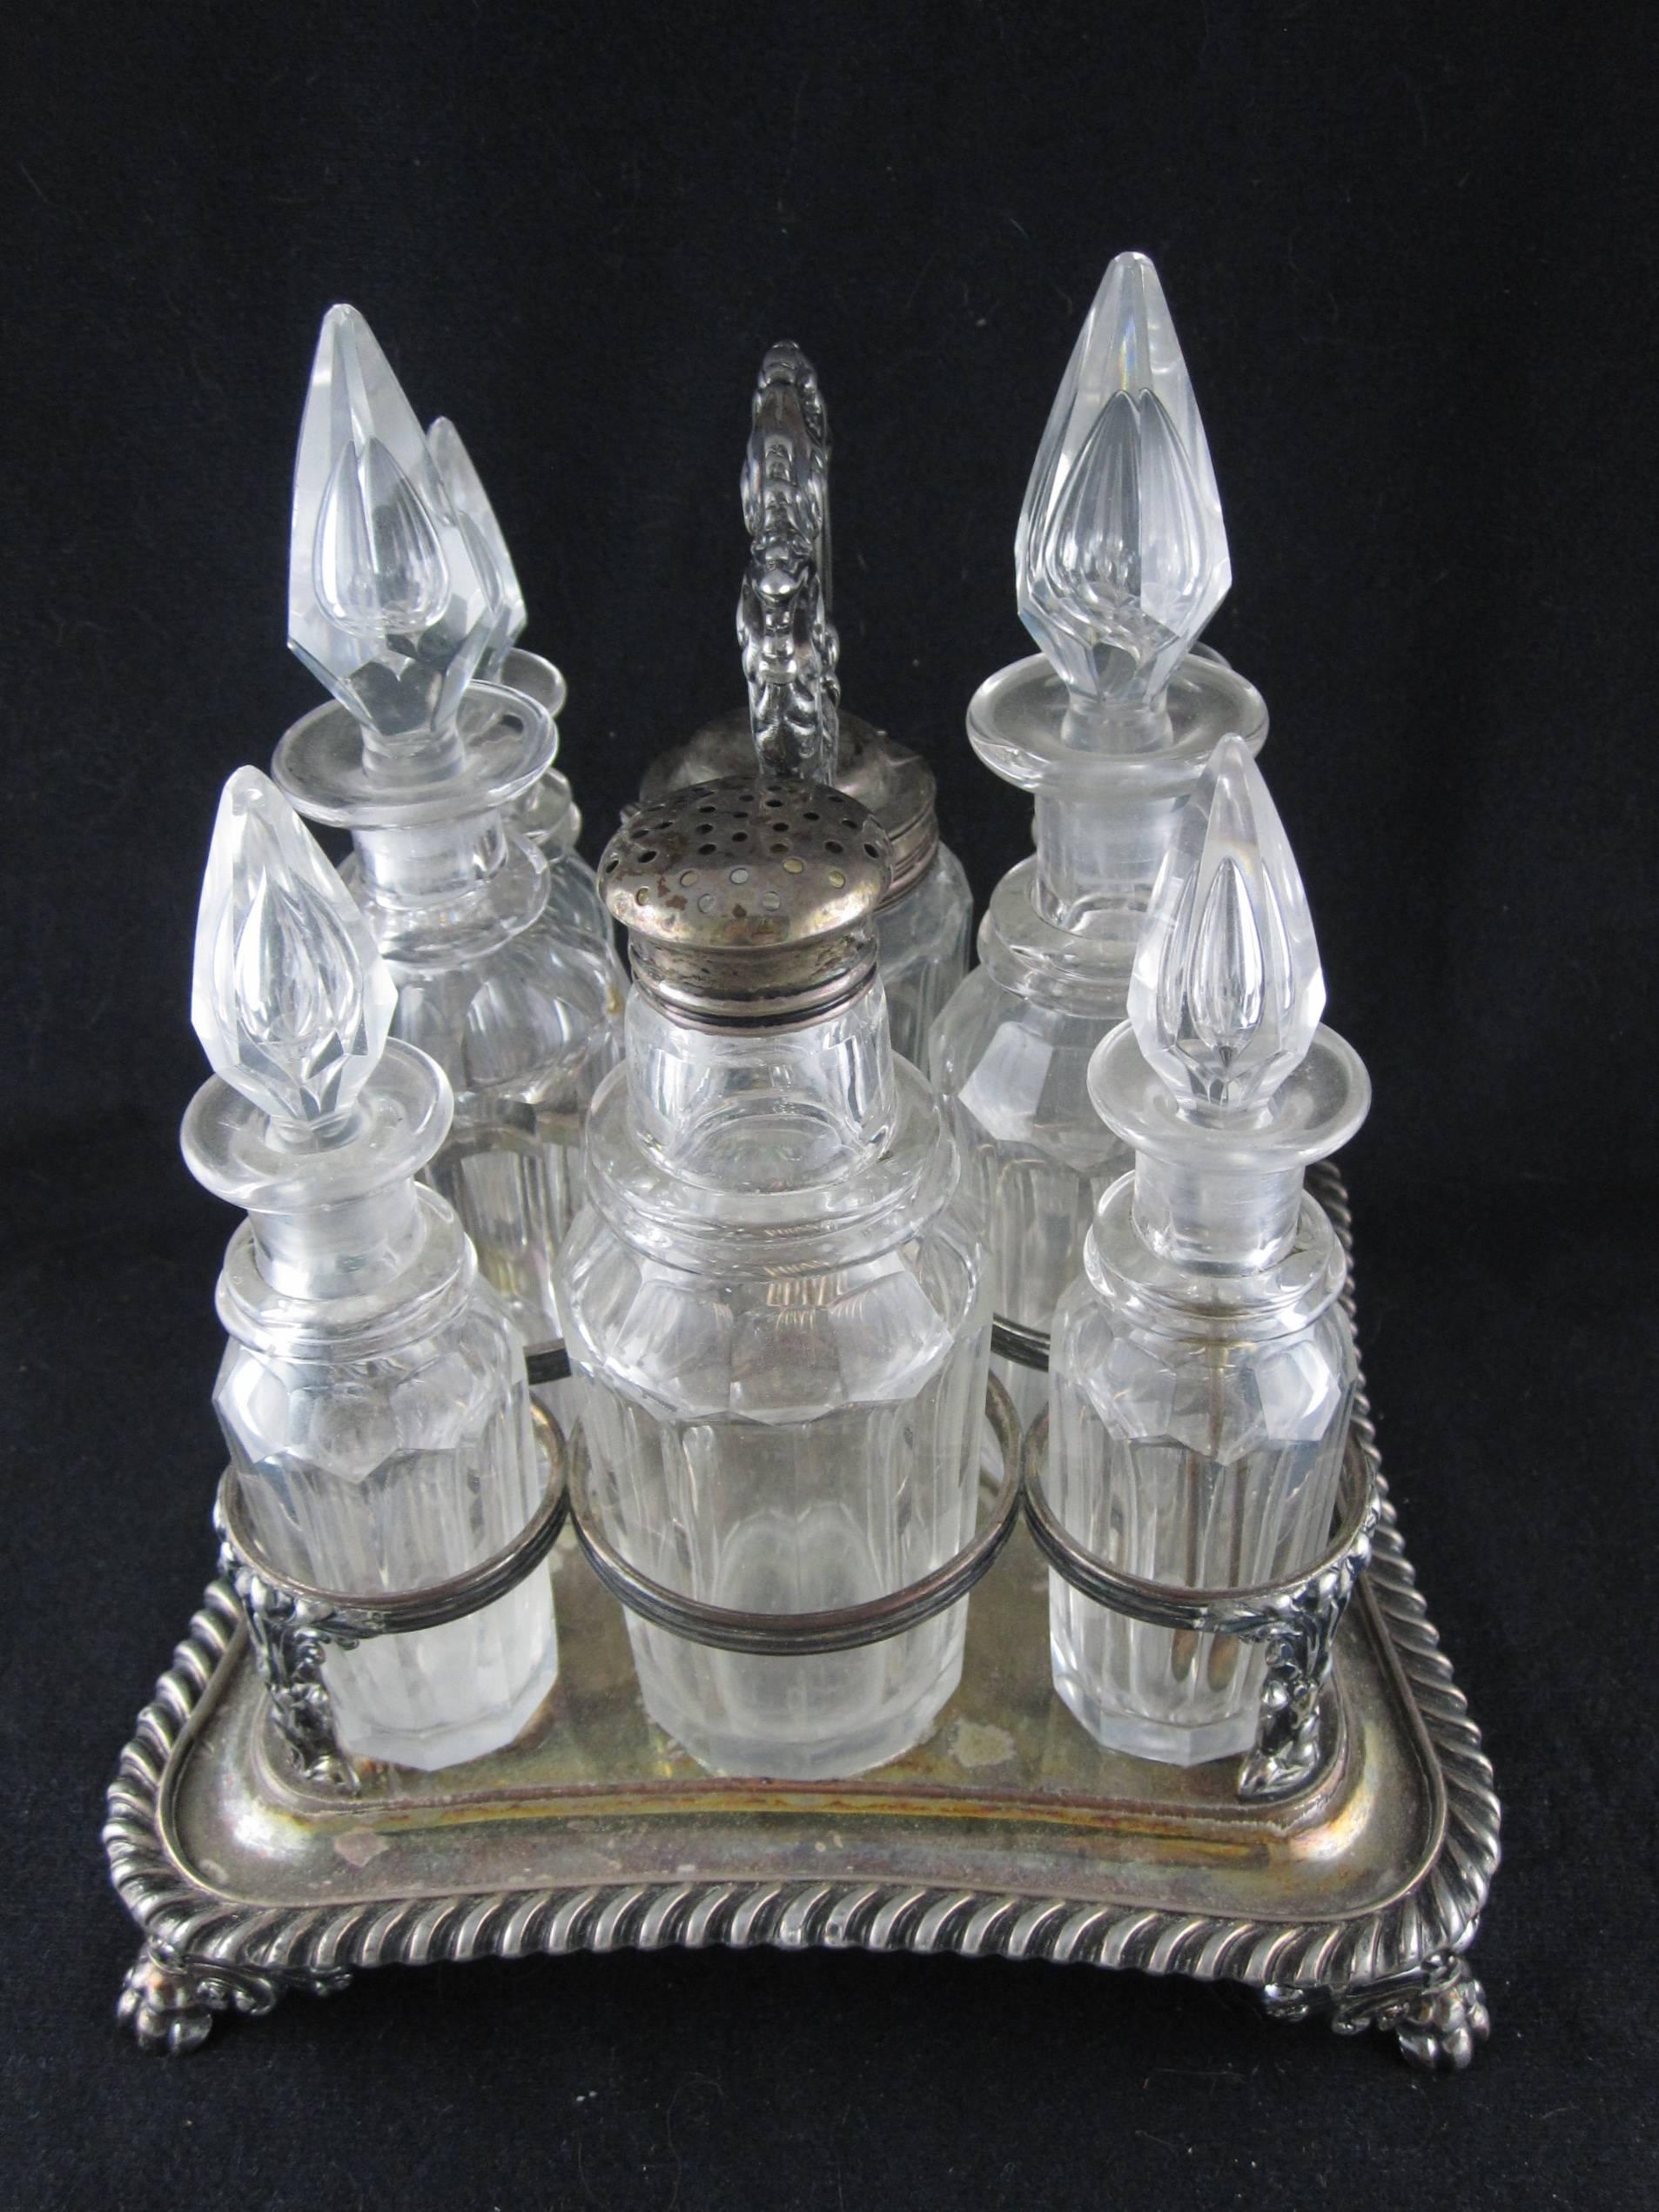 An English Victorian condiment and cruet set consisting of a stand fitted for eight paneled glass bottles with faceted stoppers. This is a heavy, oversize stand with castors for mustard, catsup, oil, vinegar, Worcestershire sauce, malt vinegar,